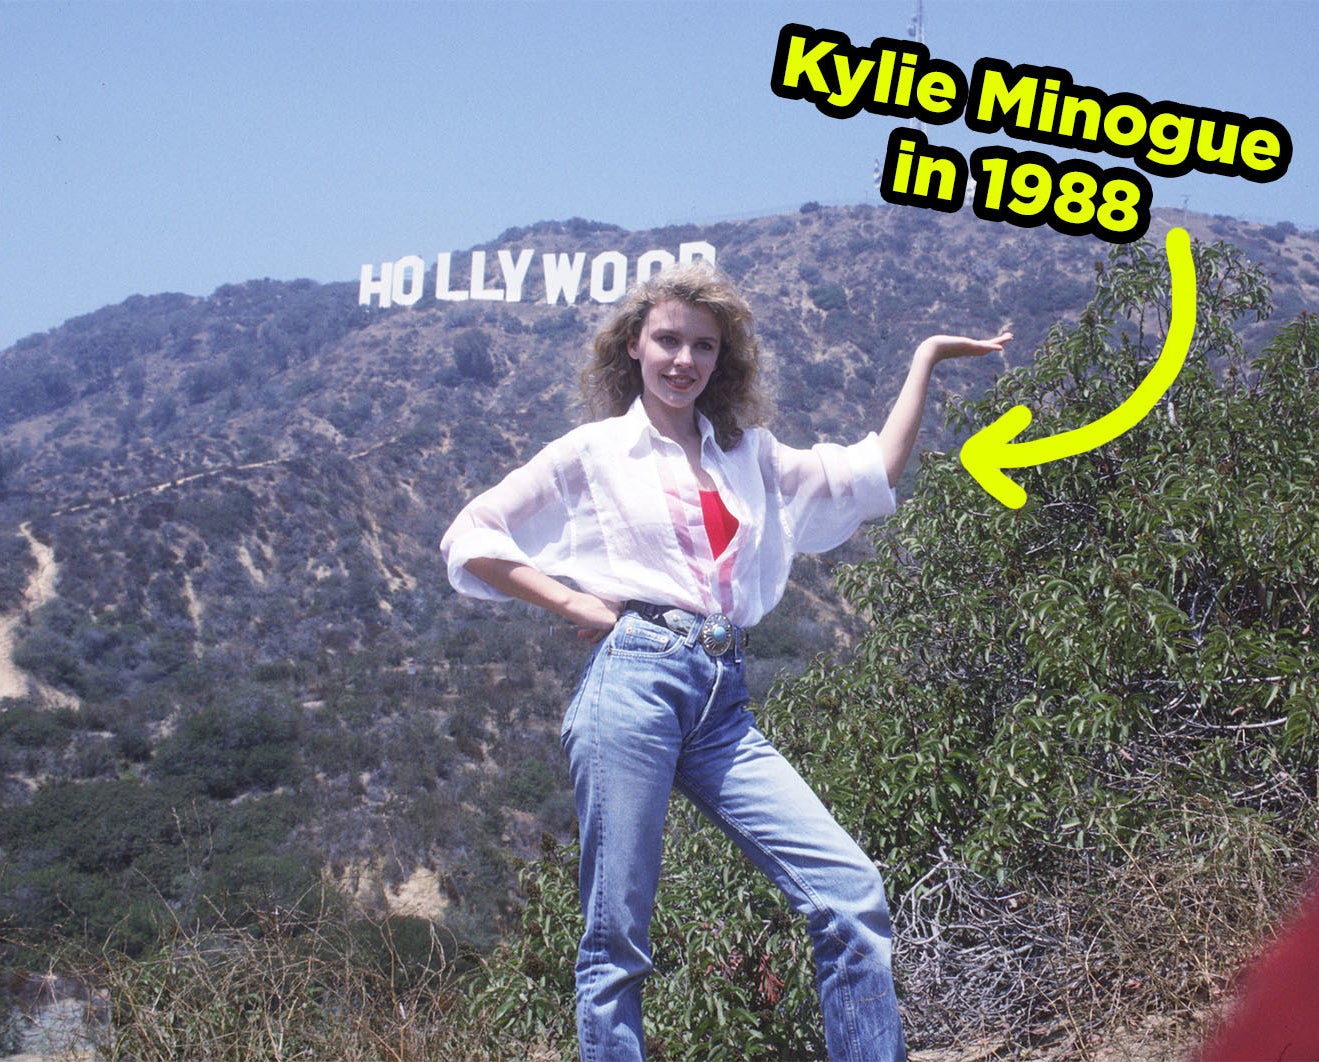 Kylie posing in front of the Hollywood sign in 1988